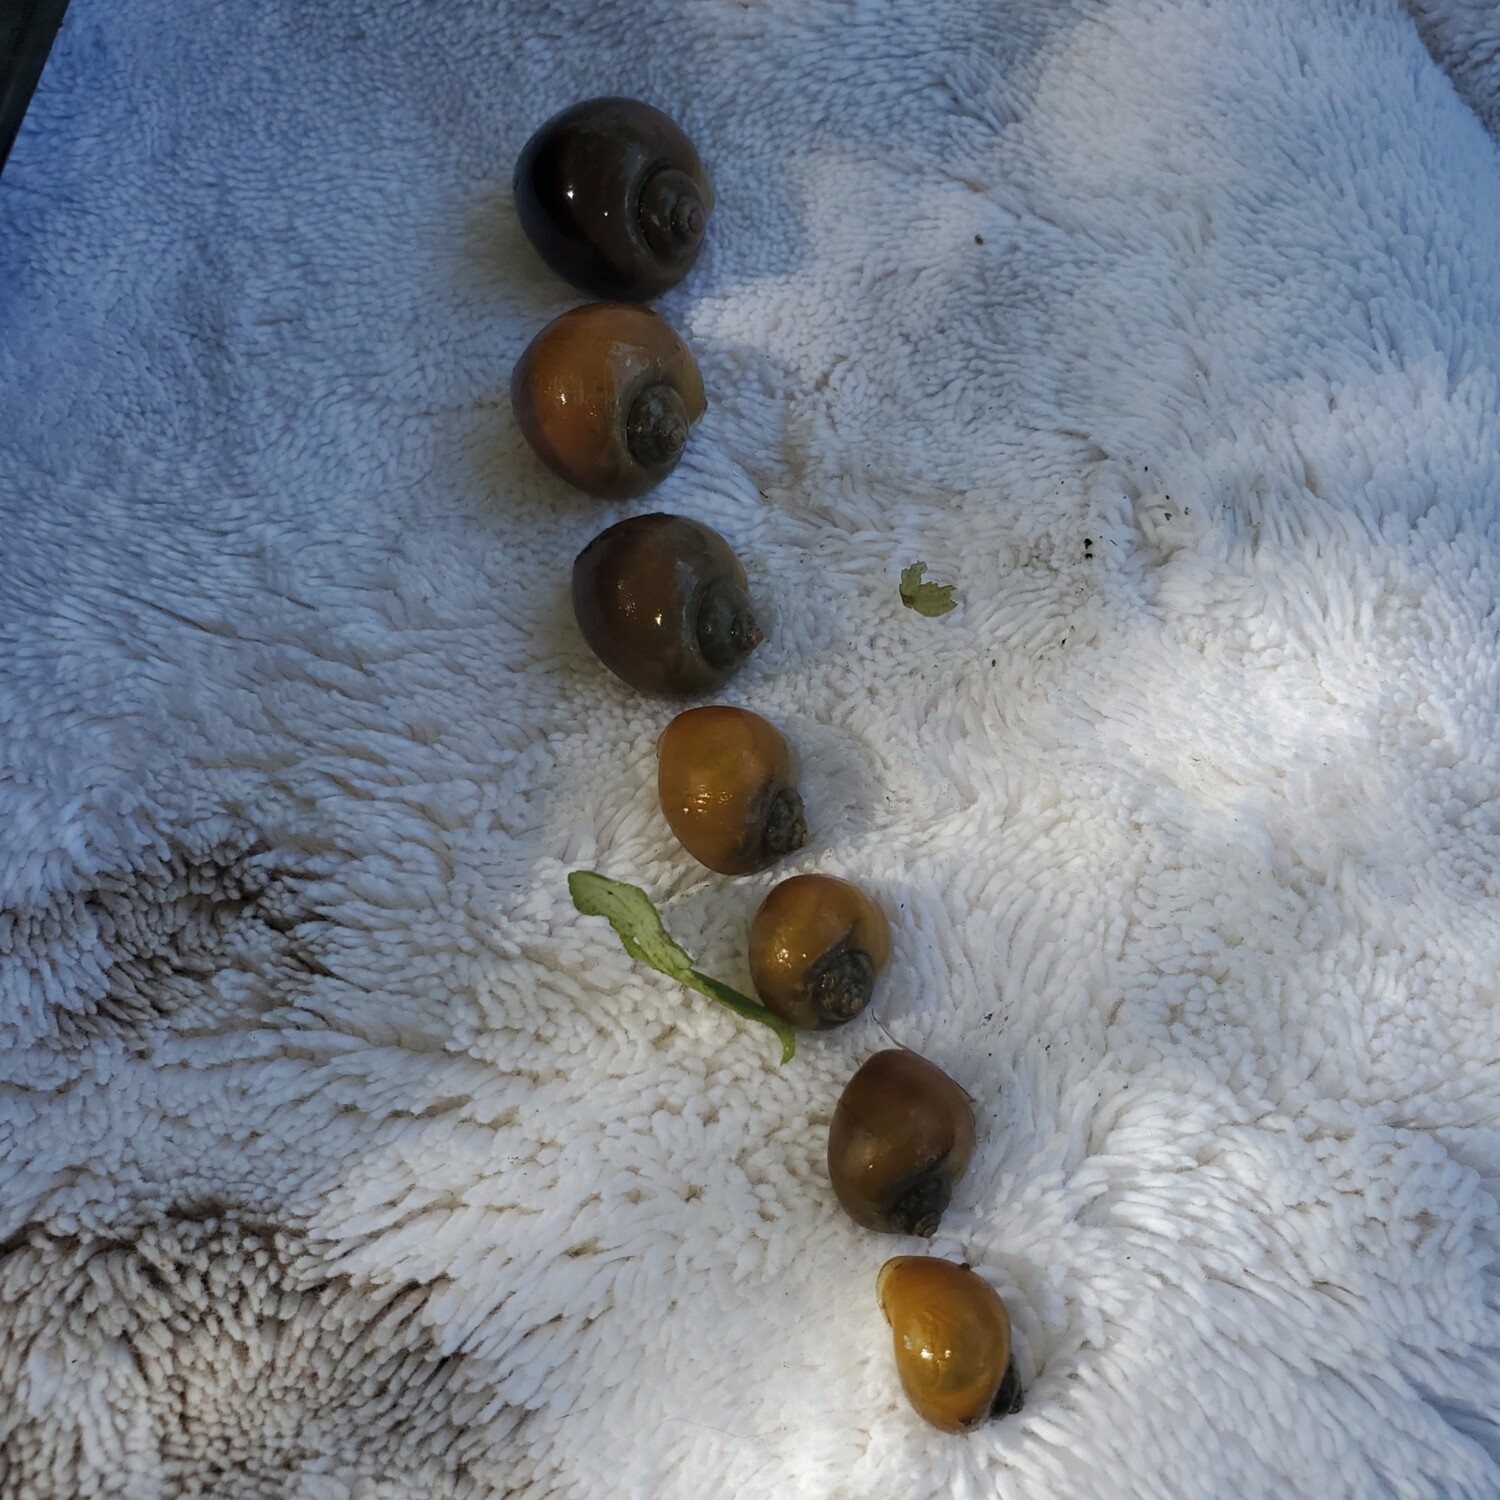 Small apple snails by the pound